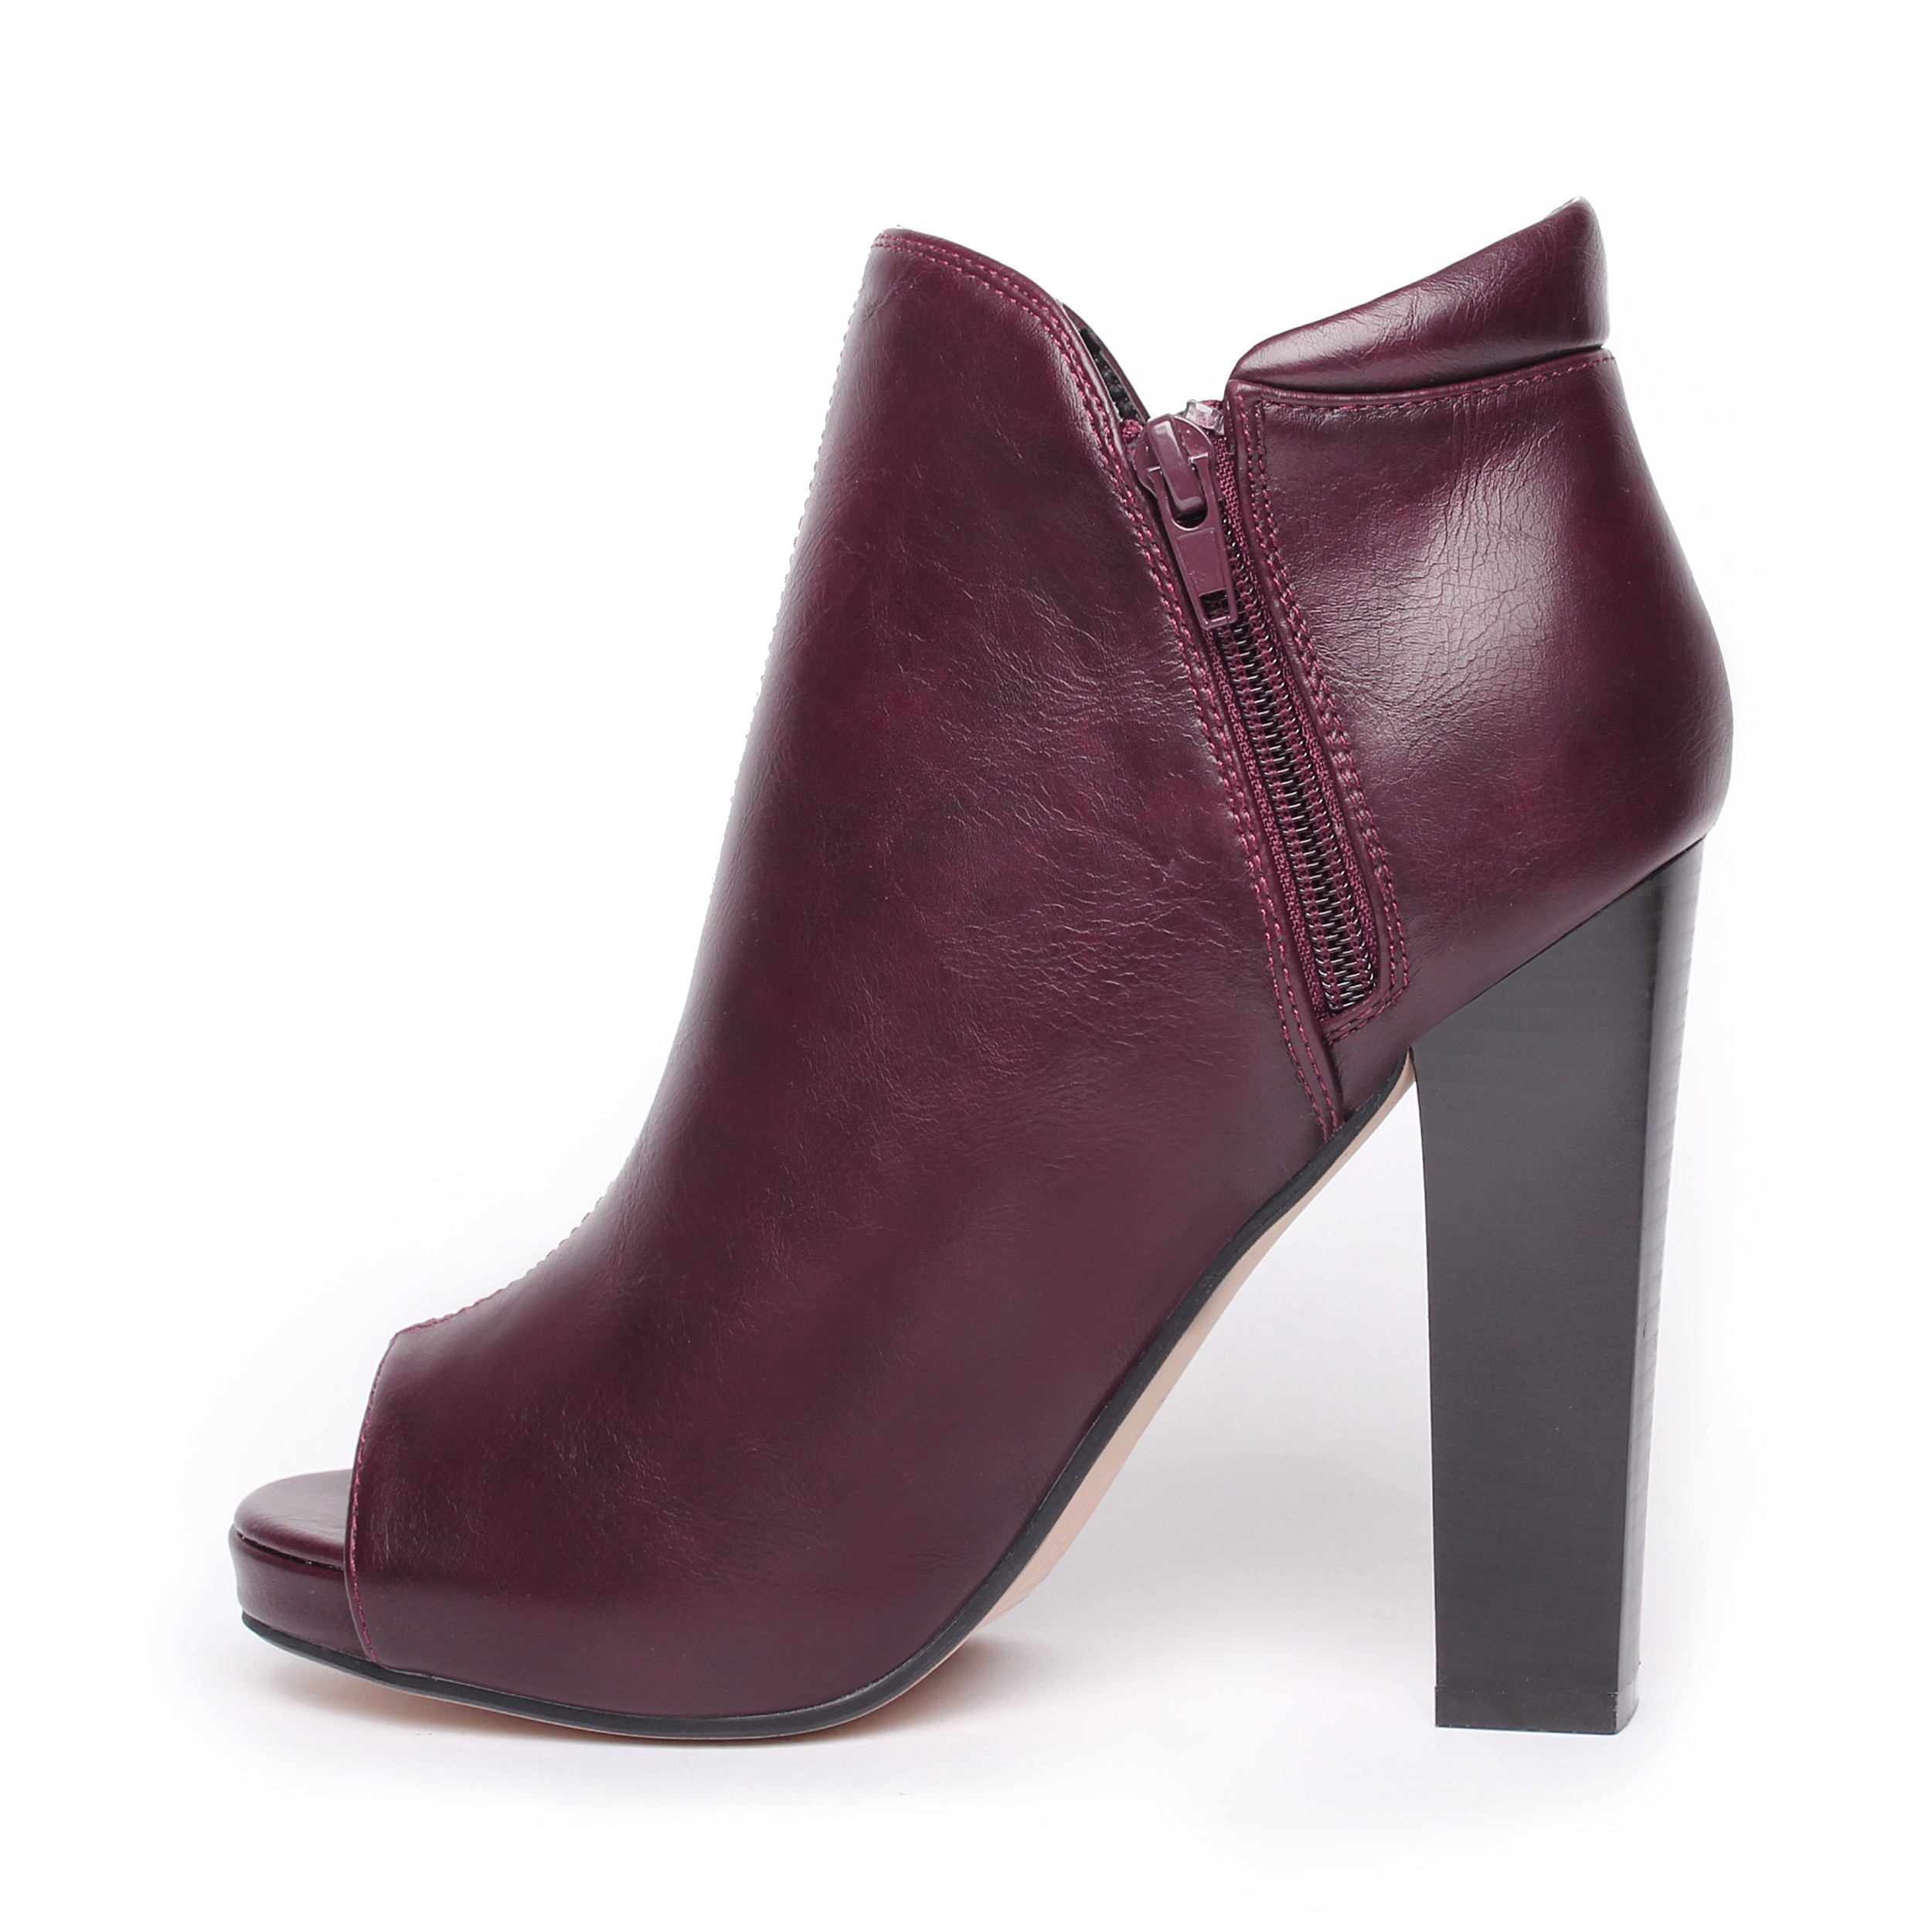 Number One Shoes - The Autumn 2015 Edit